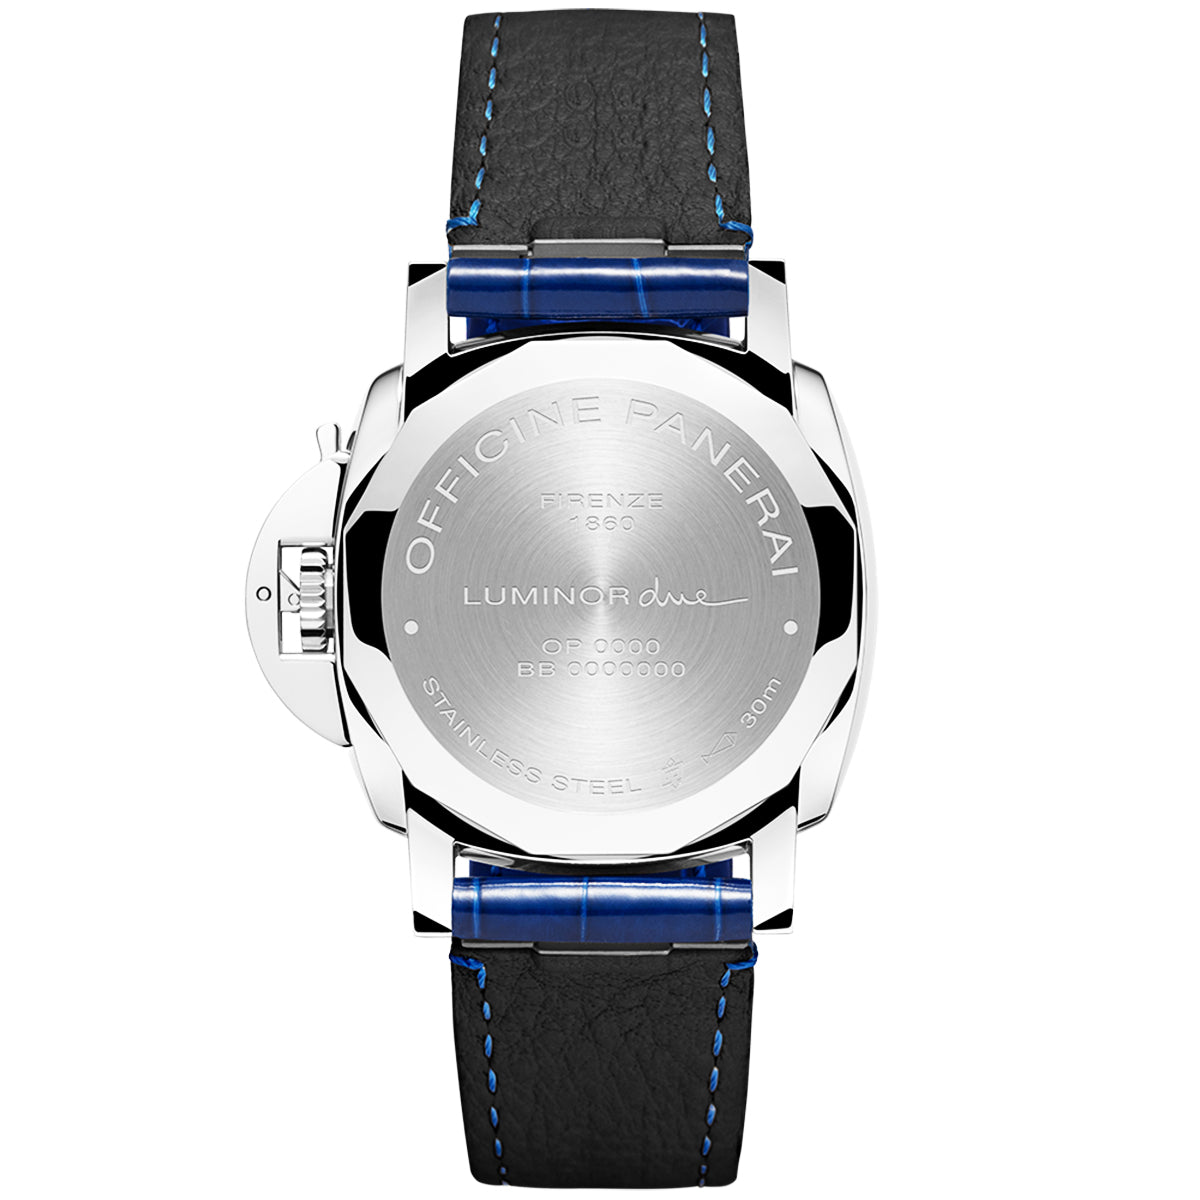 Luminor Due 38mm Blue/Rose Dial Automatic Leather Strap Watch